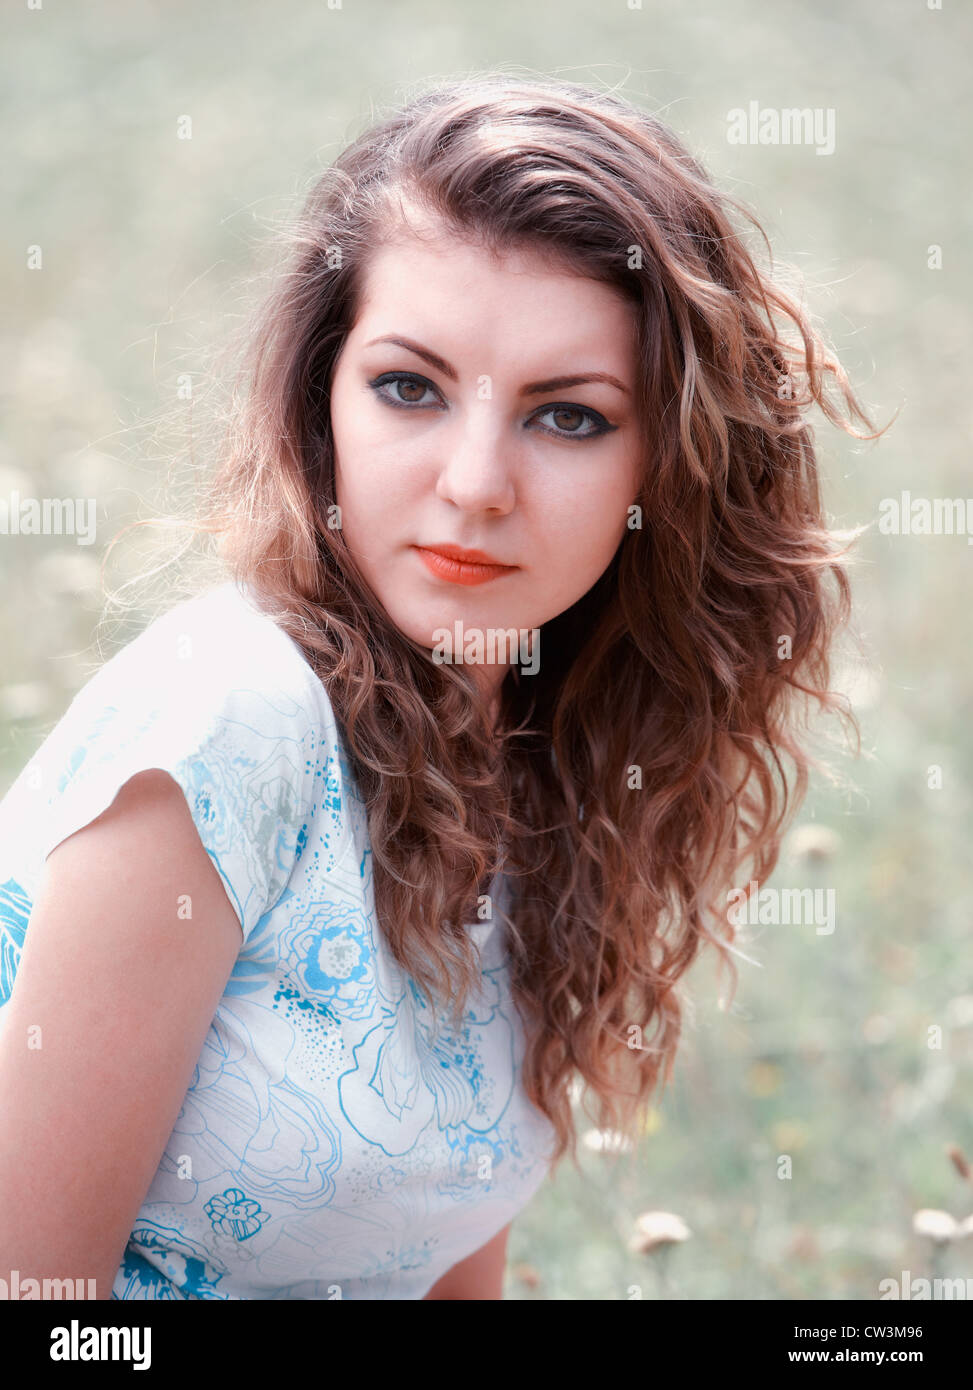 Portrait of a beautiful 20 year old woman enjoying a summer day outdoor. Stock Photo